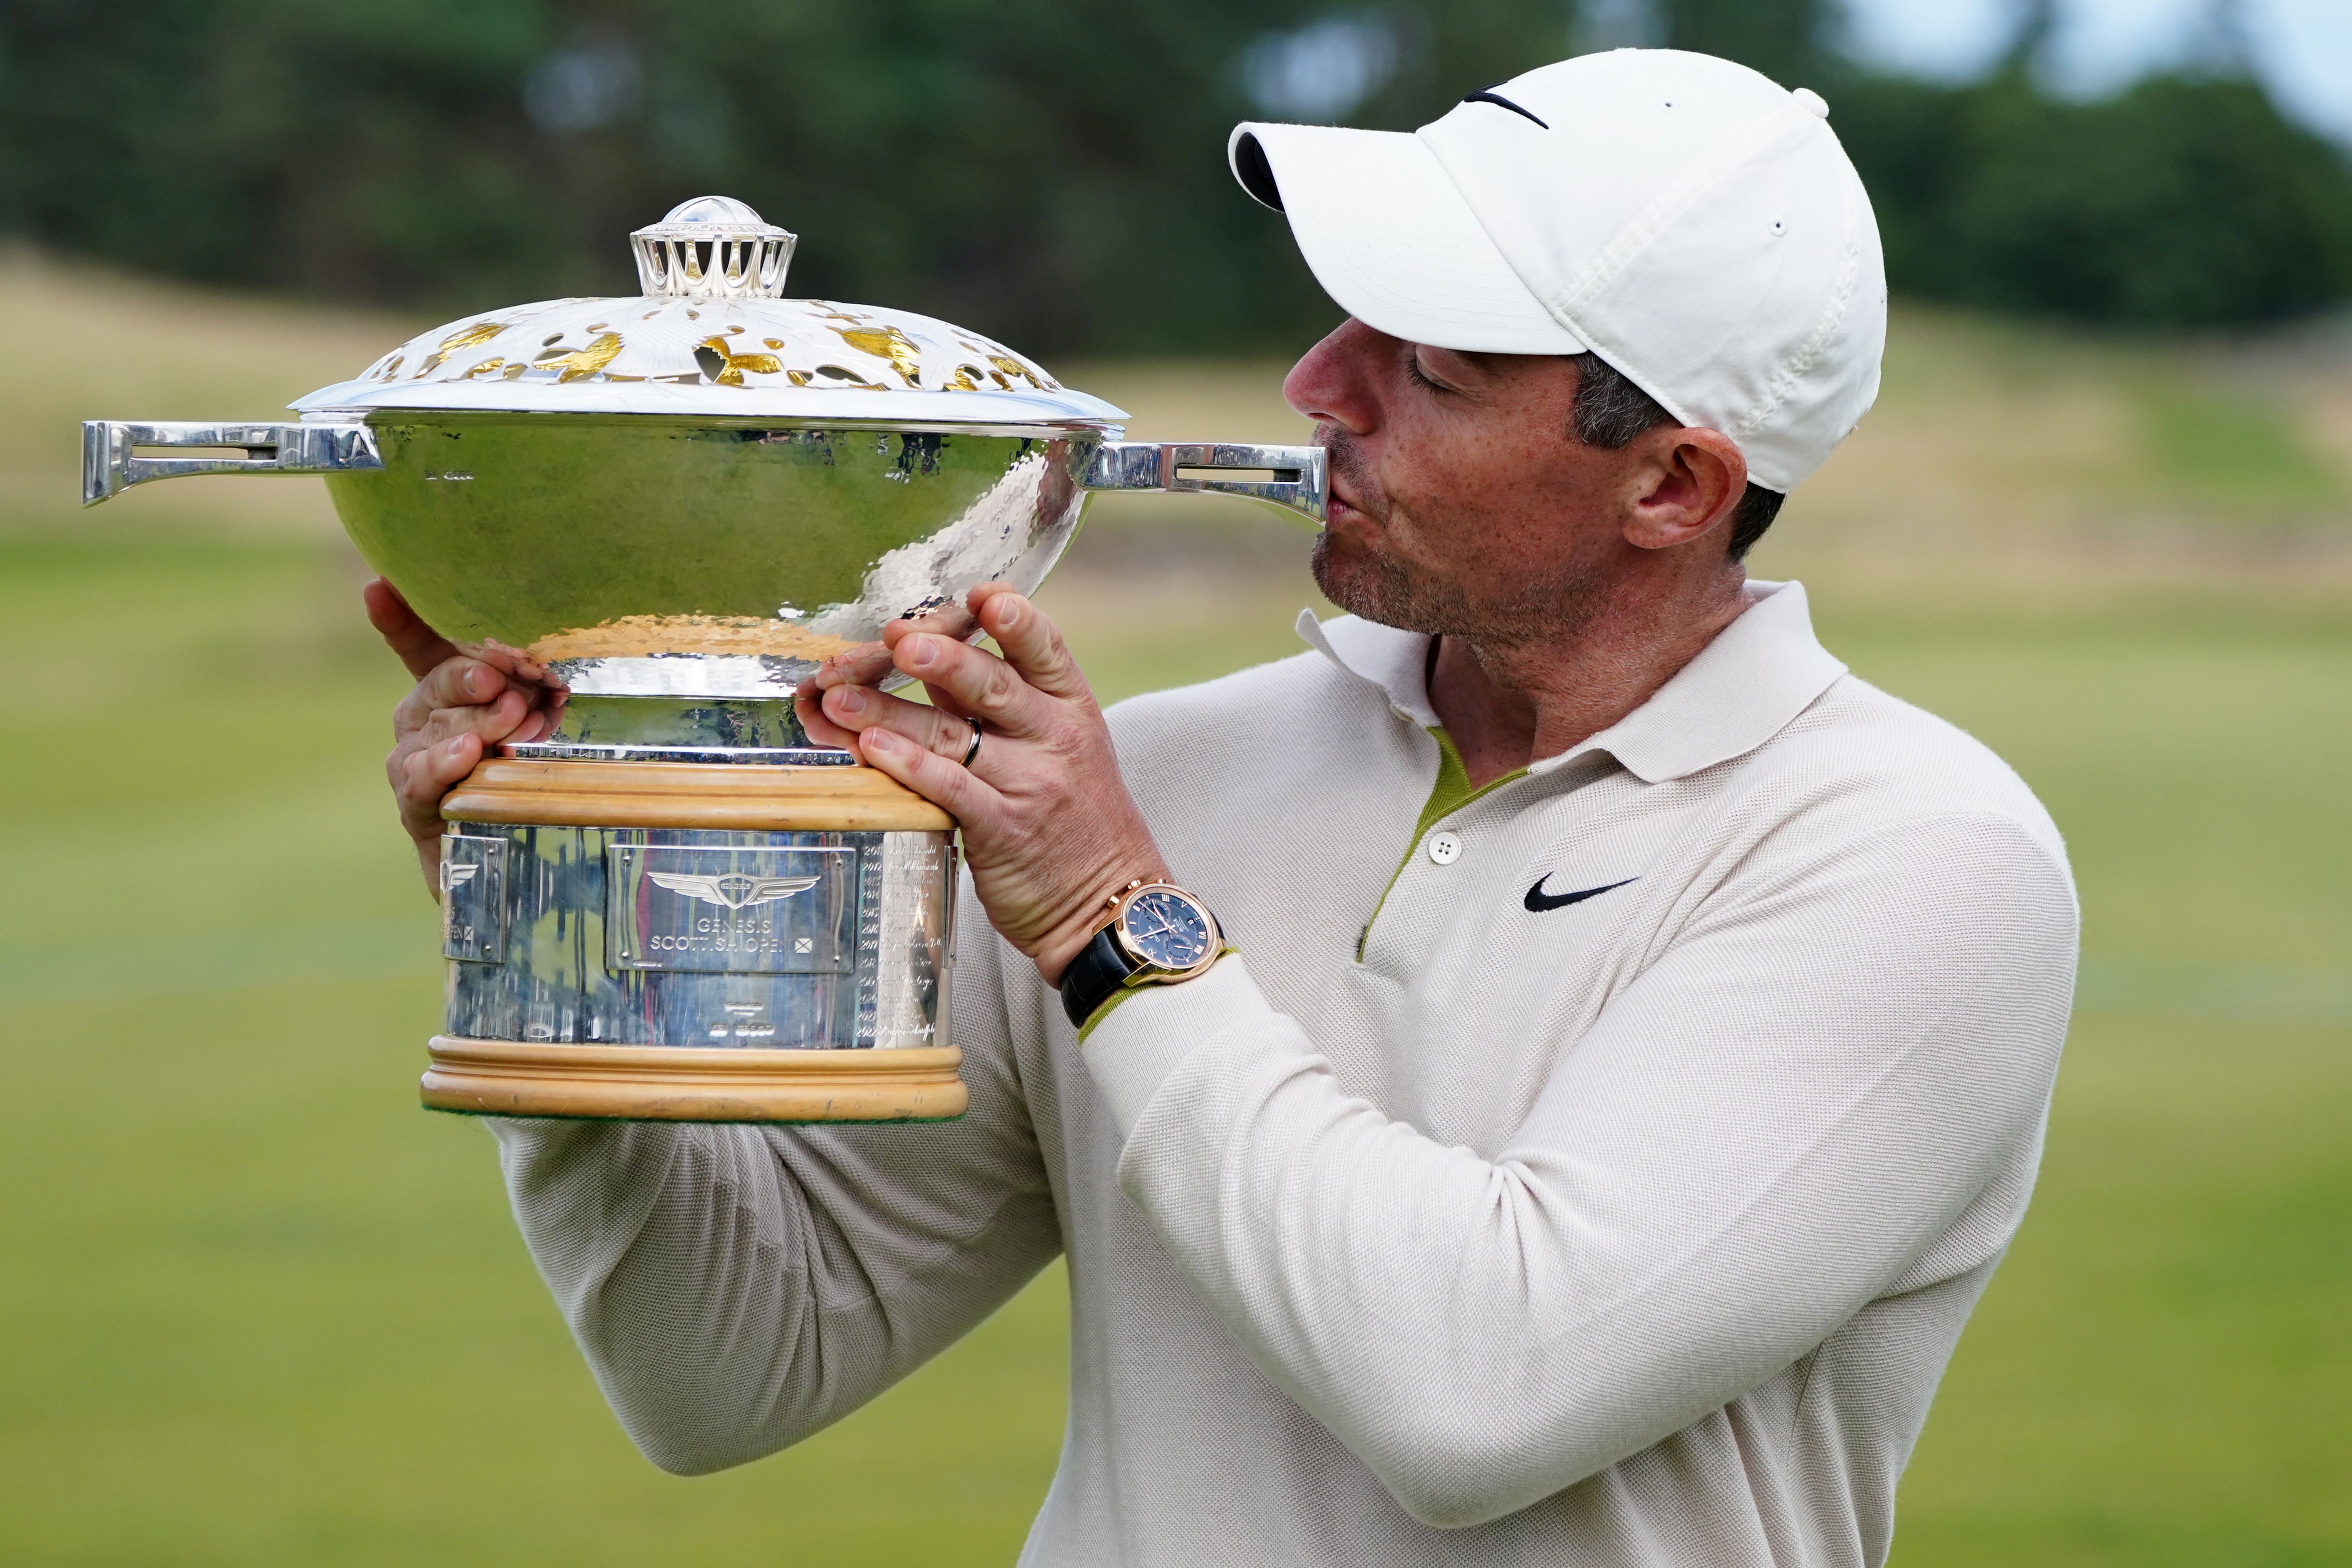 McIlroy brilliantly won the Scottish Open with birdies at the 71st and 72nd holes last week